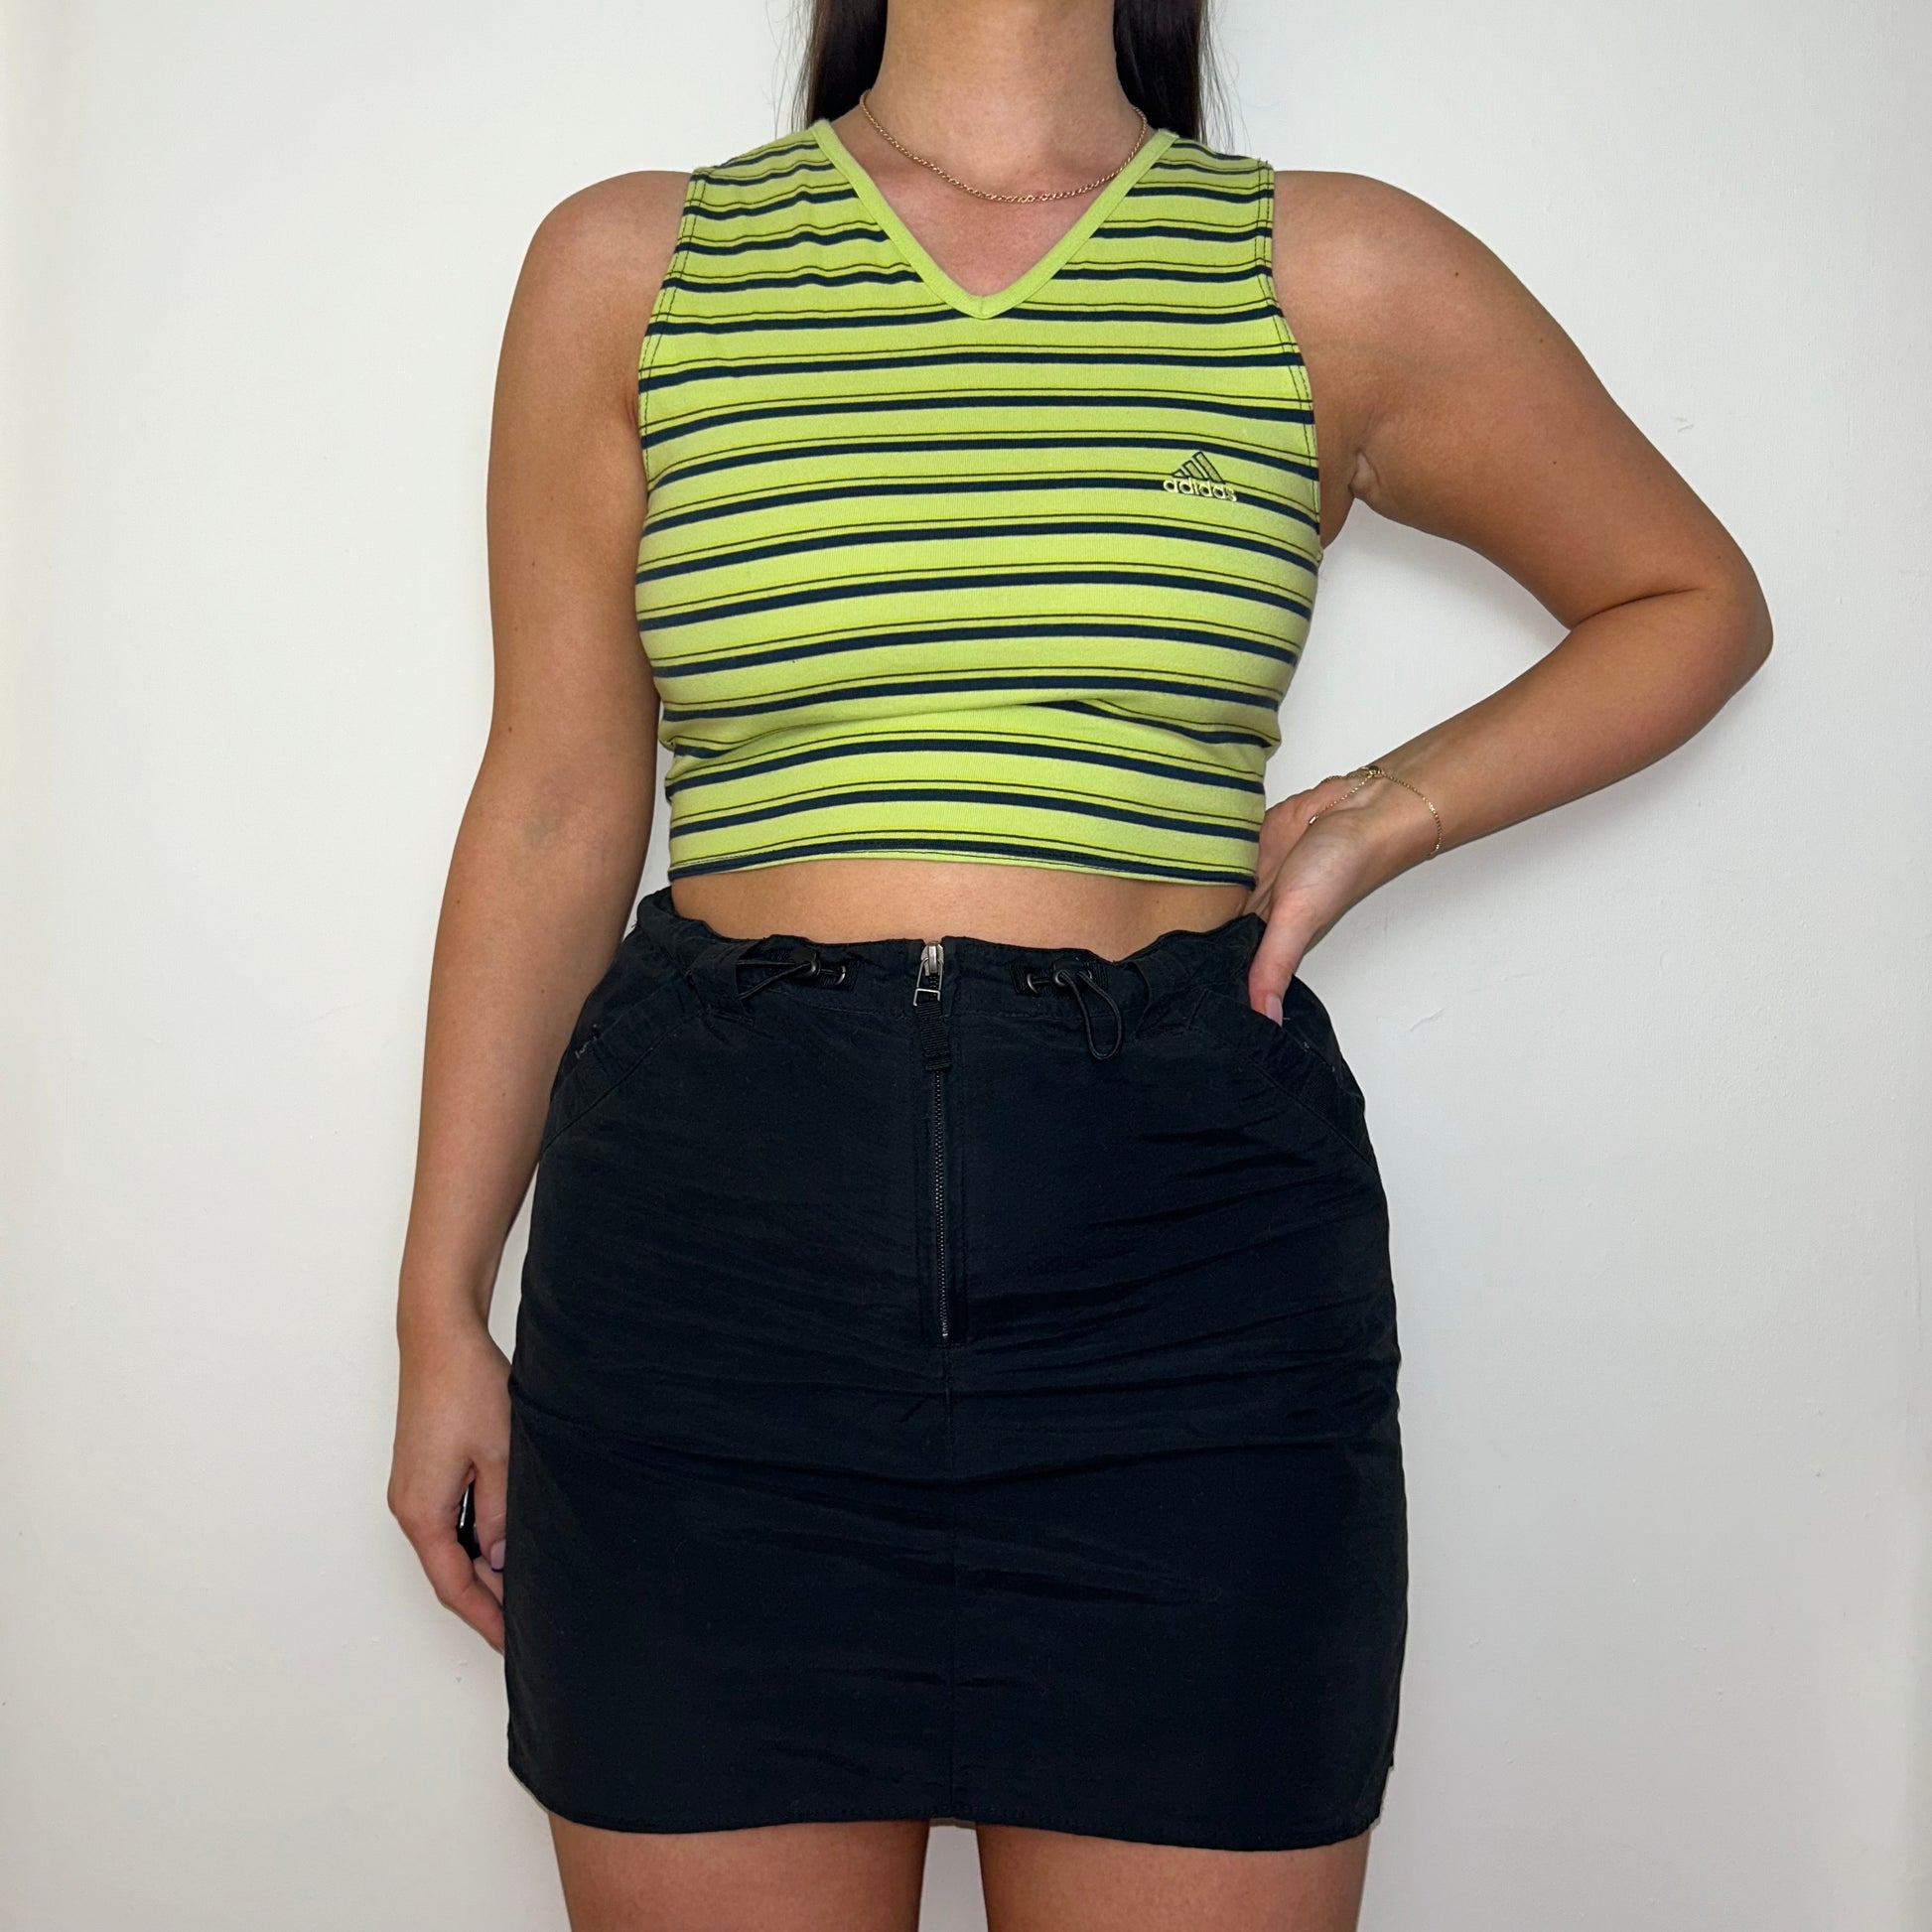 green and black sleeveless crop top with small adidas logo shown on a model wearing a black mini skirt